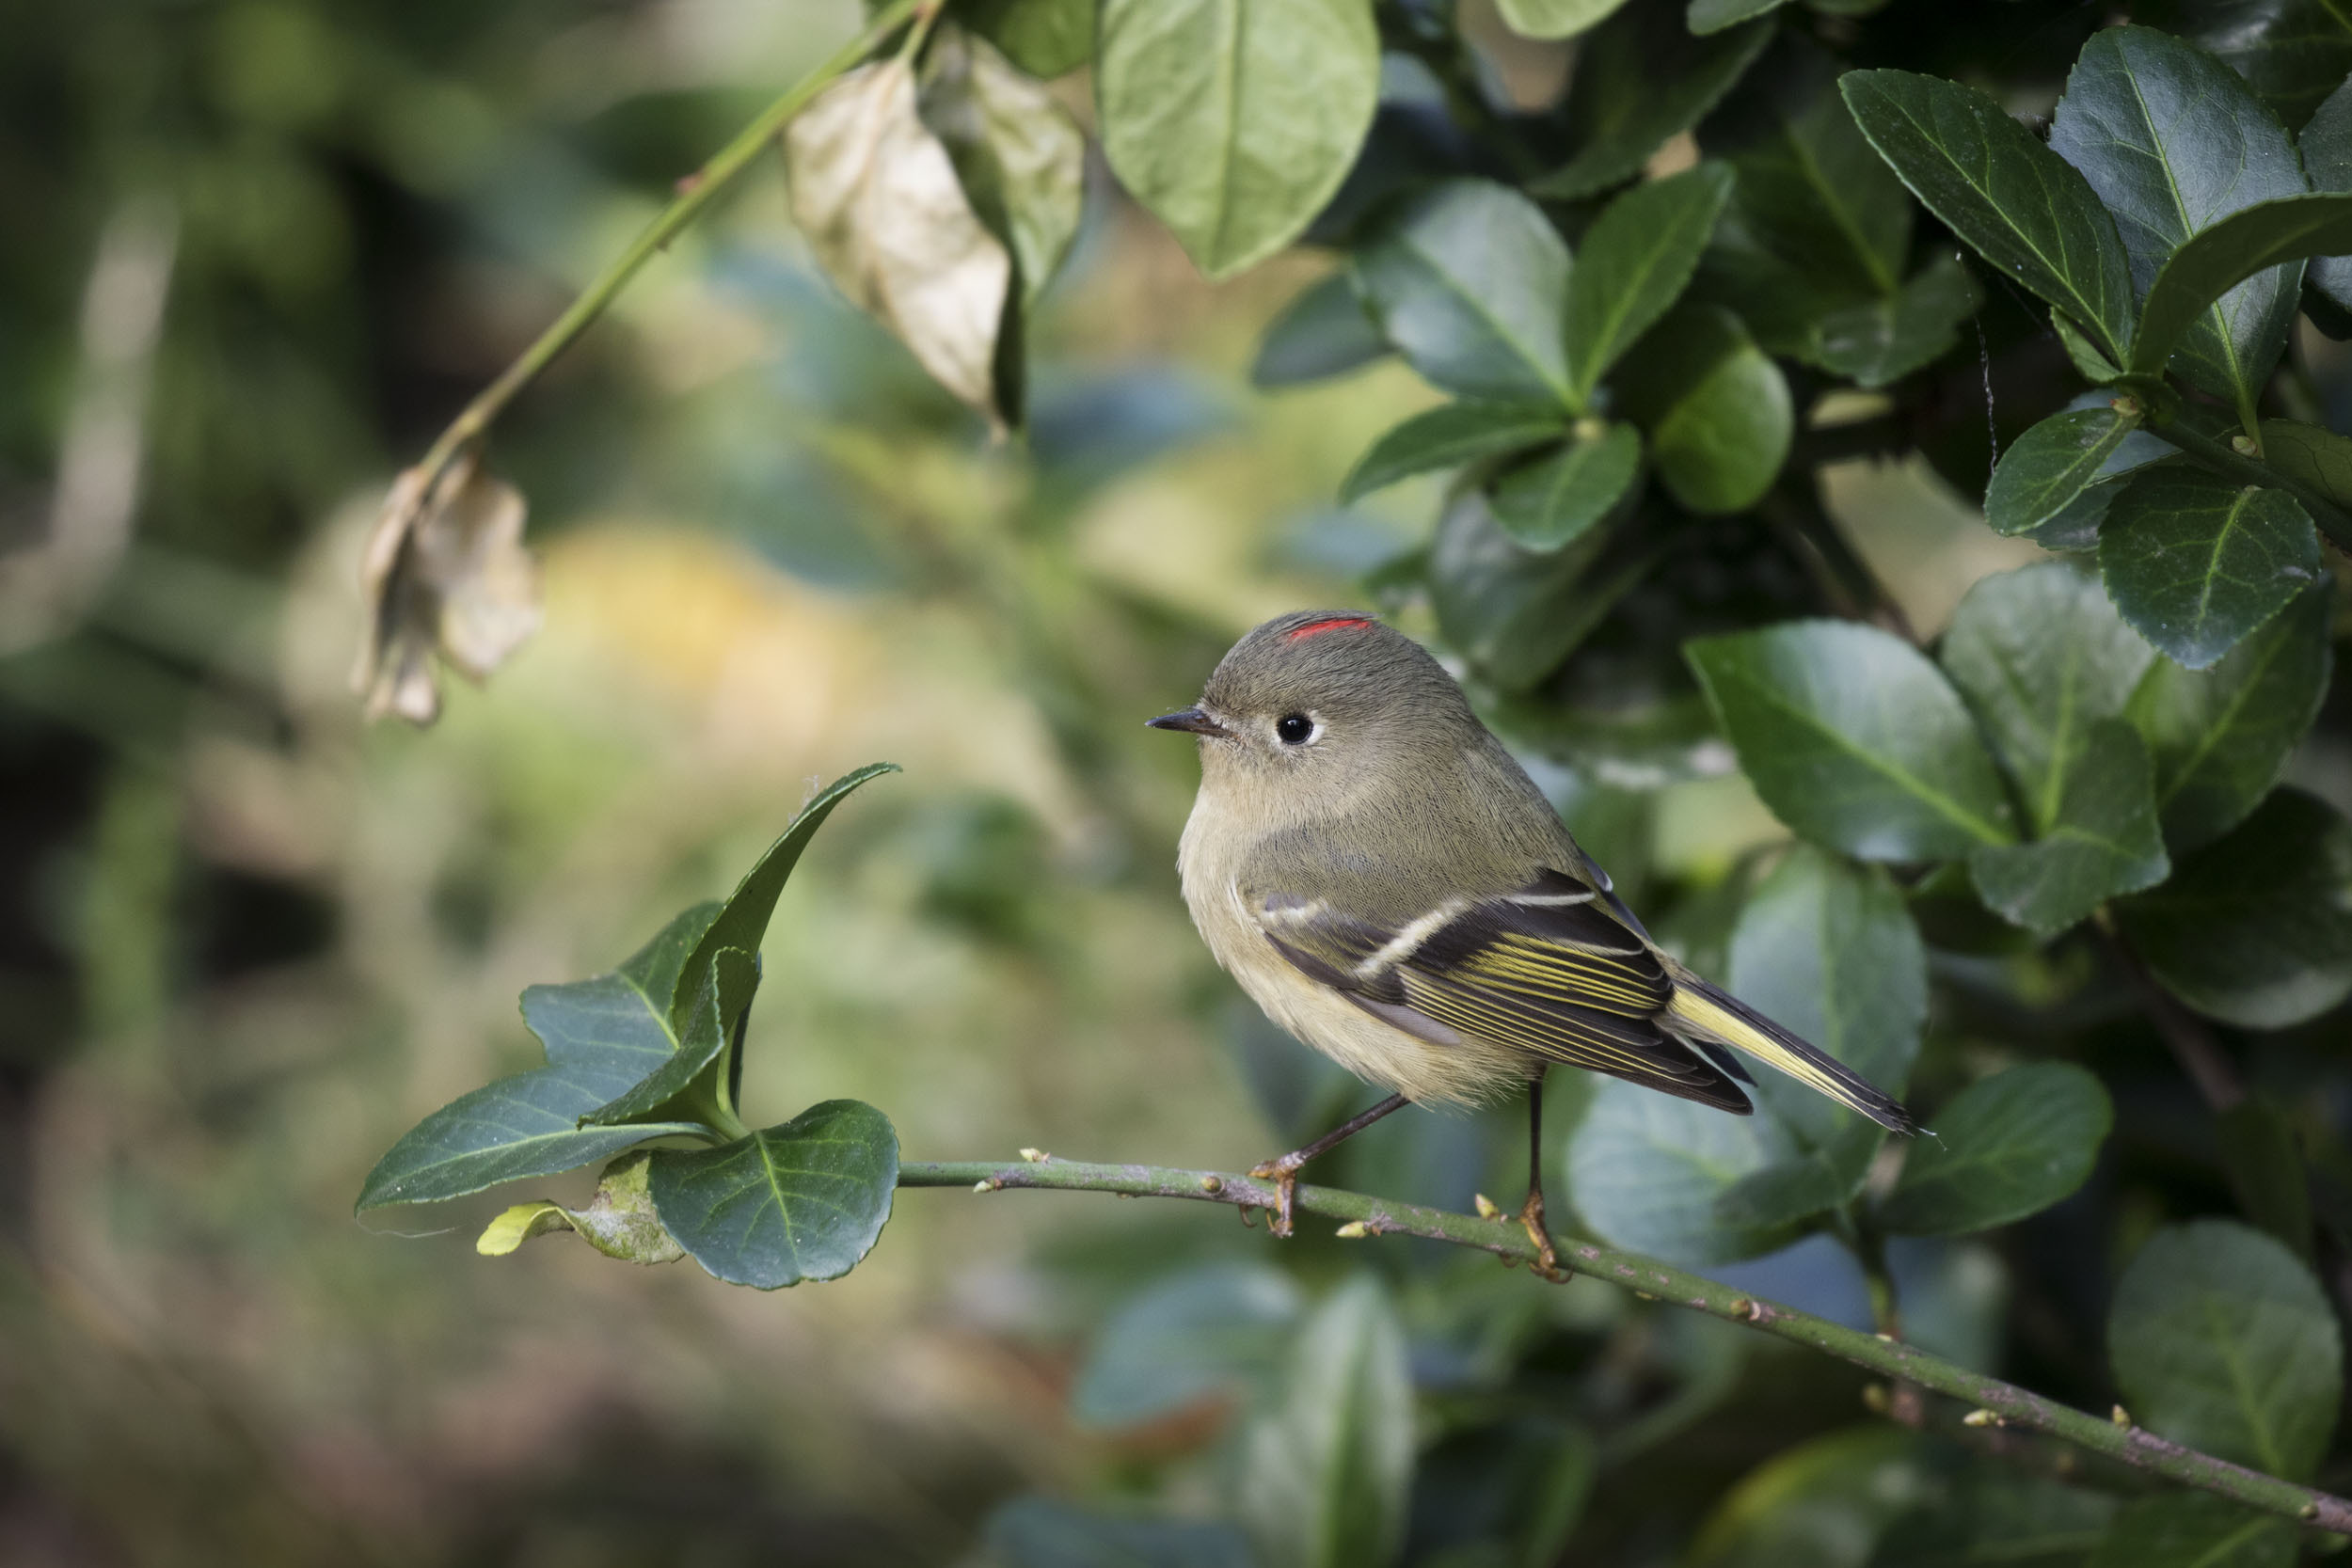 Ruby-crowned Kinglets and many other migrants stop through Union Square Park. Photo: François Portmann